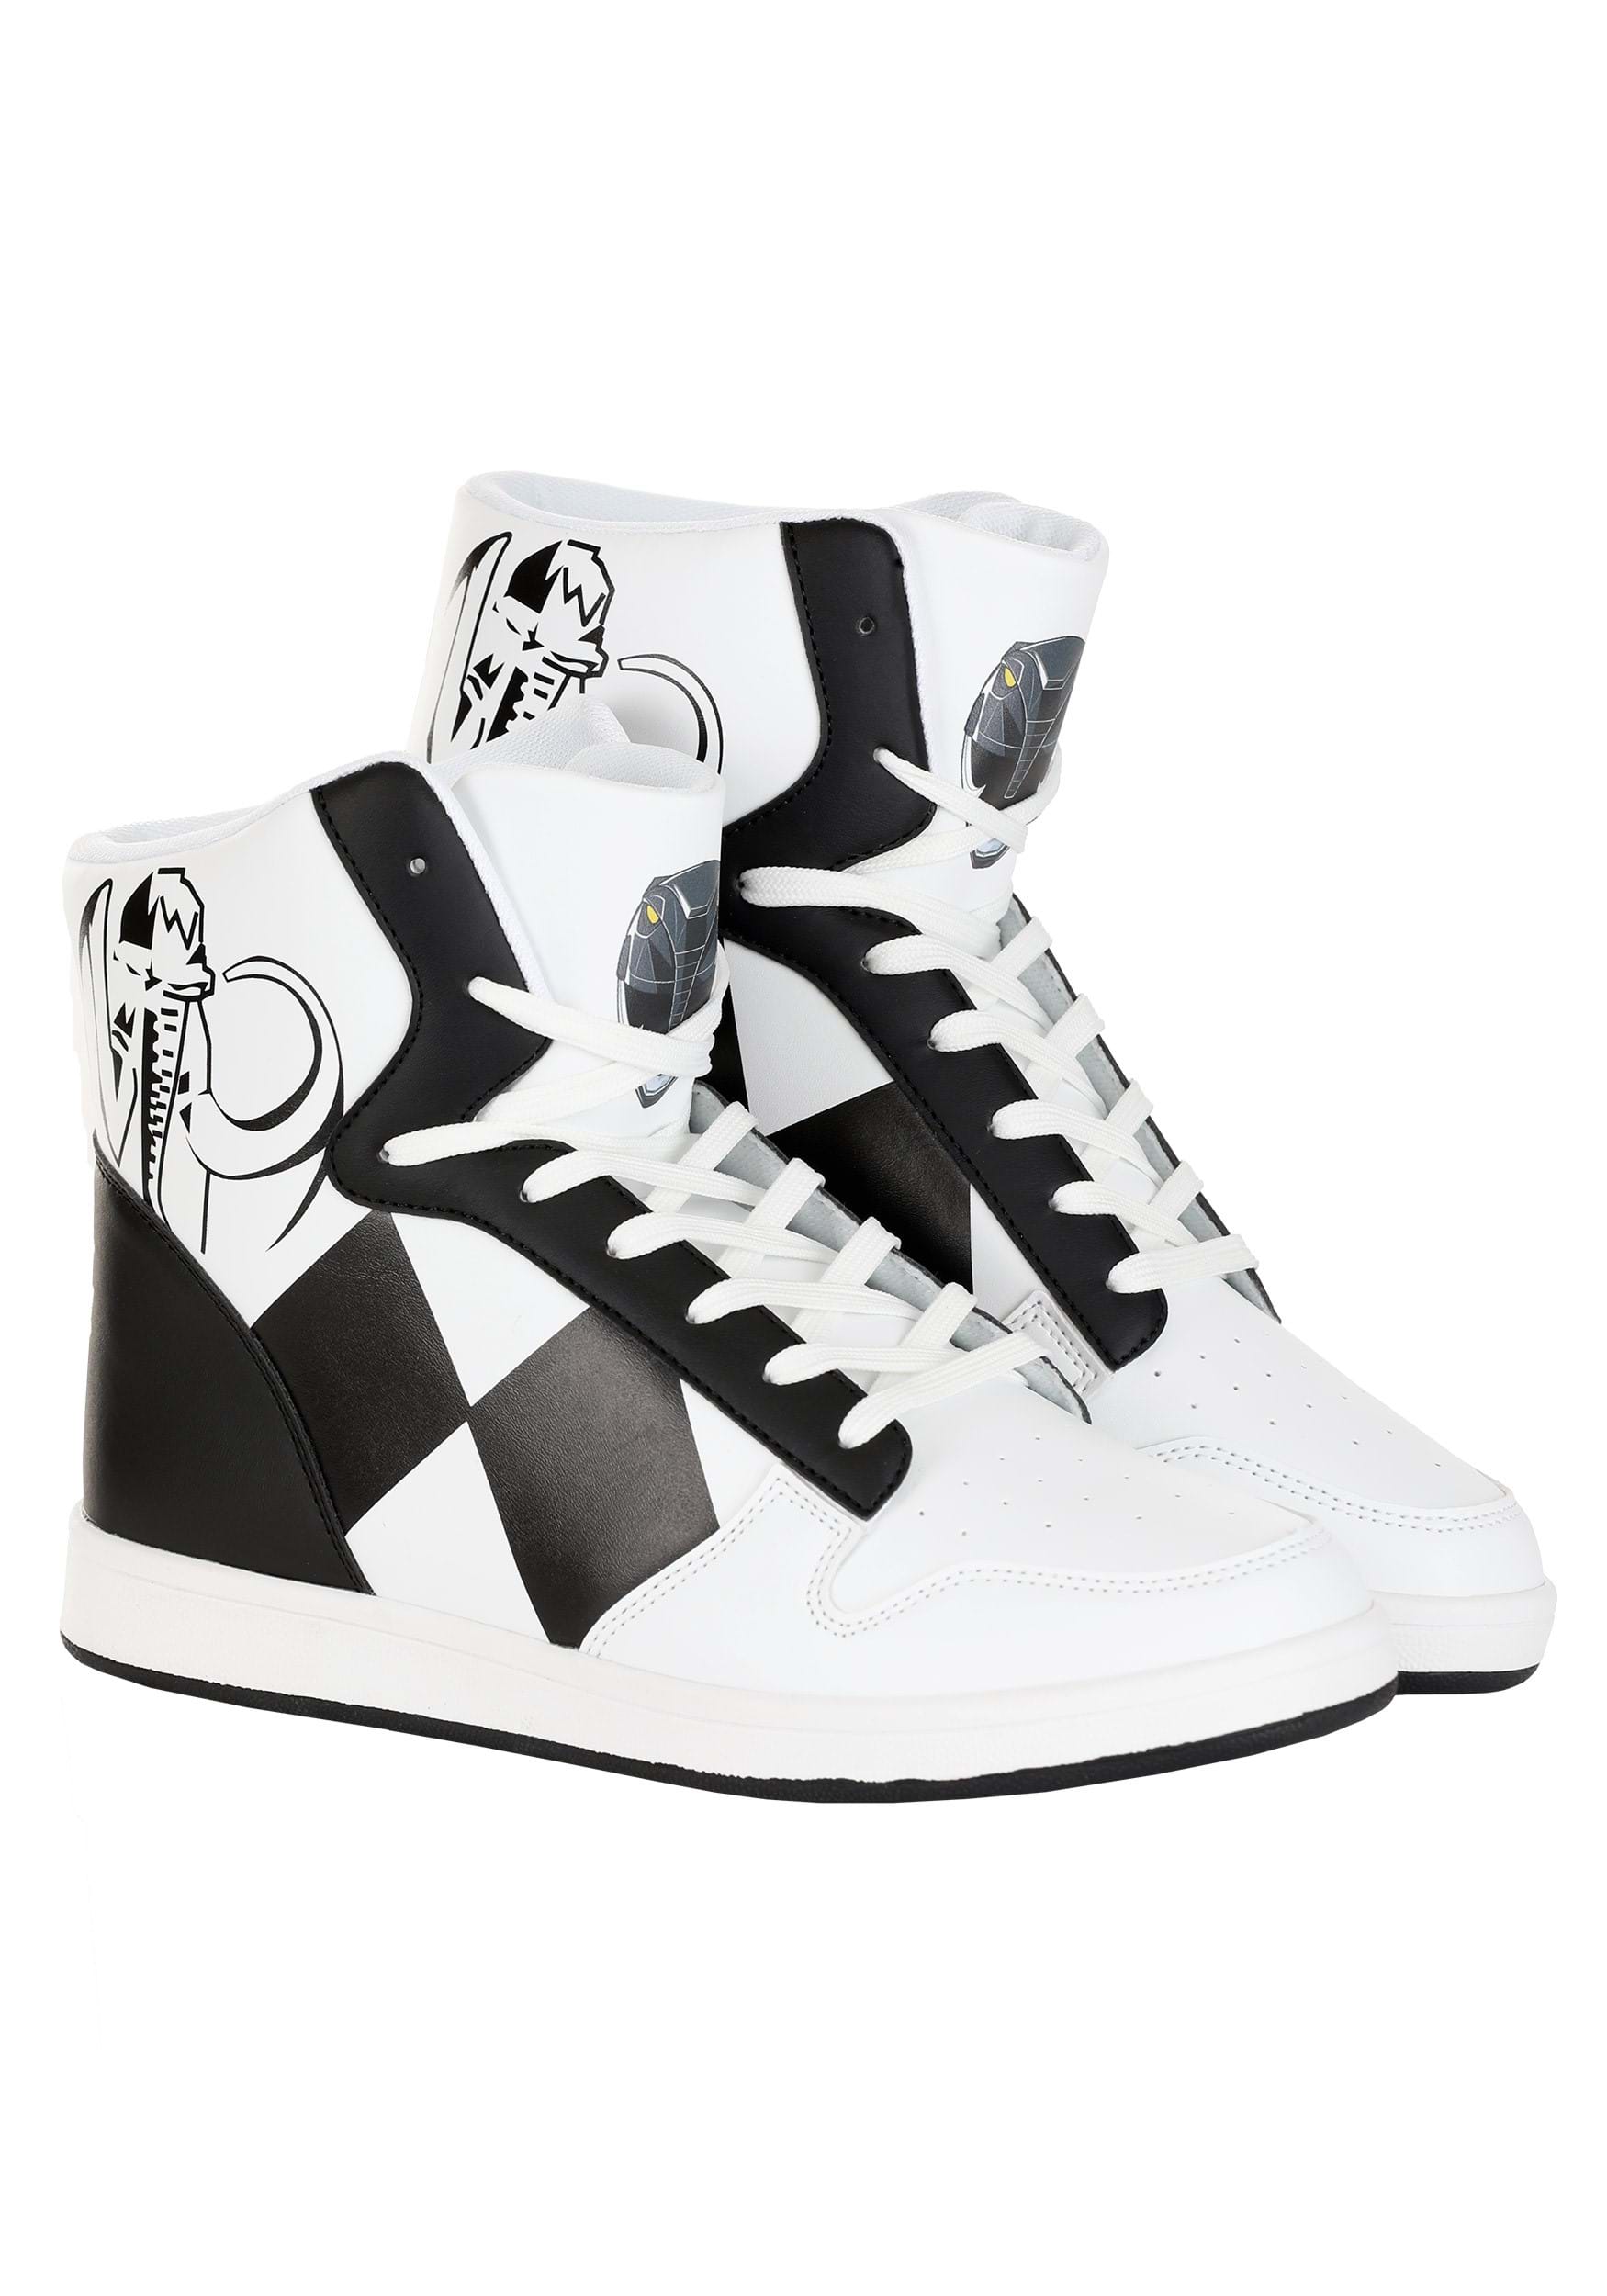 Black Power Rangers Costume Inspired Sneakers for Adults